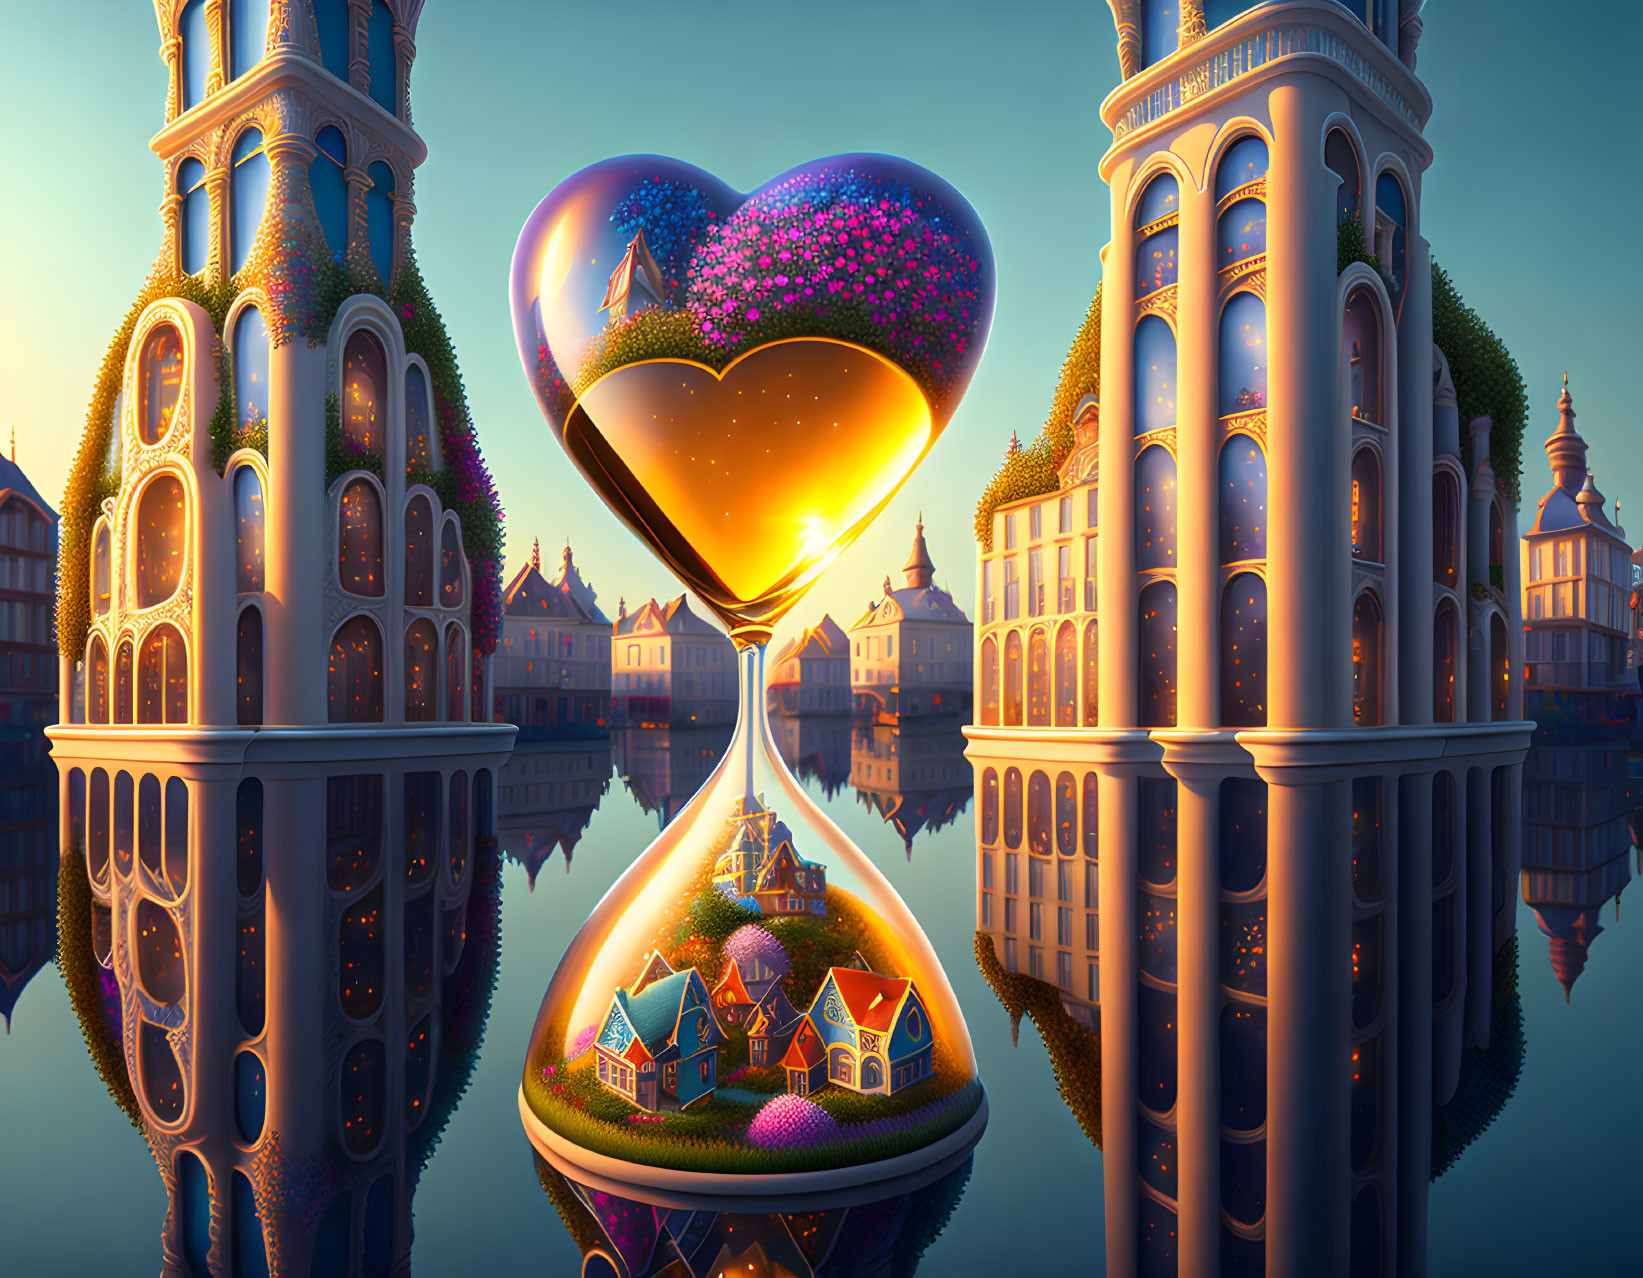 Heart-shaped hourglass with village in vibrant colors against twilight backdrop